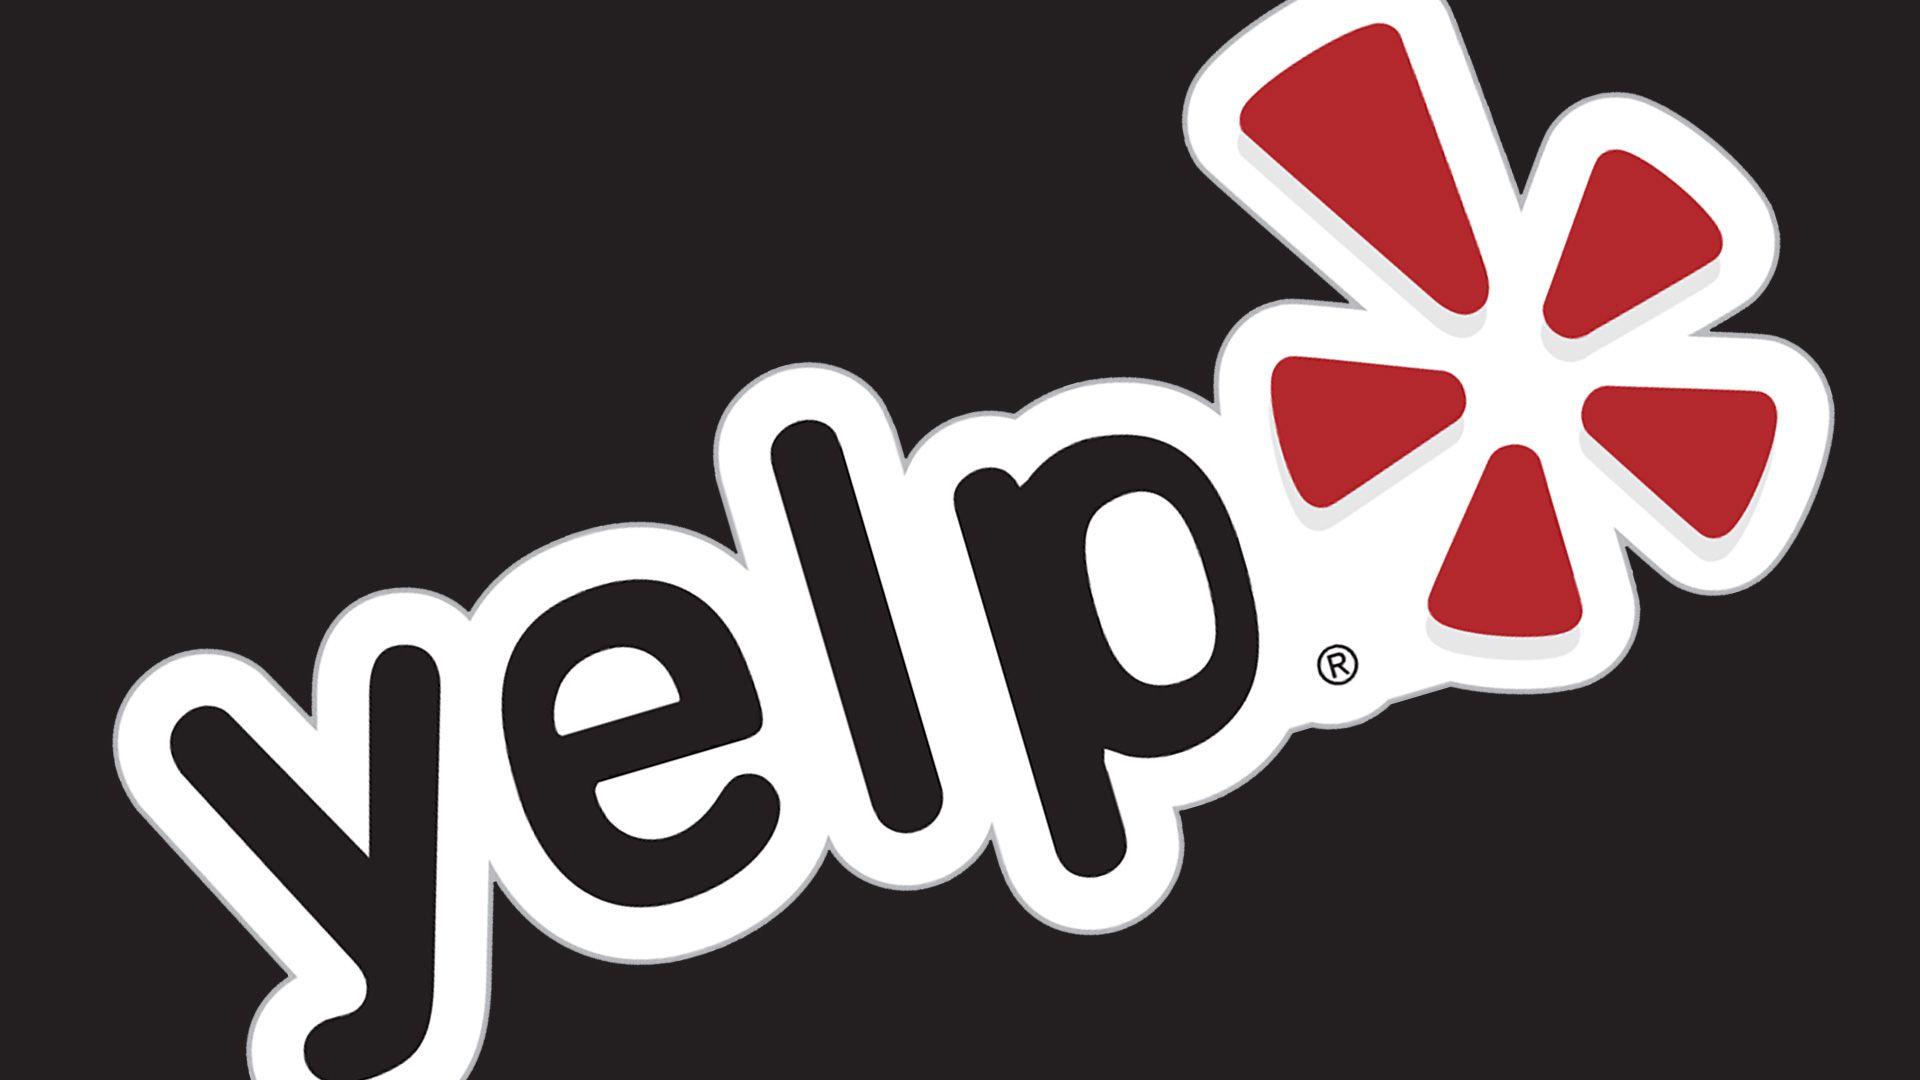 Yelp Review Logo - Next Level Yelp Tricks For Business Owners